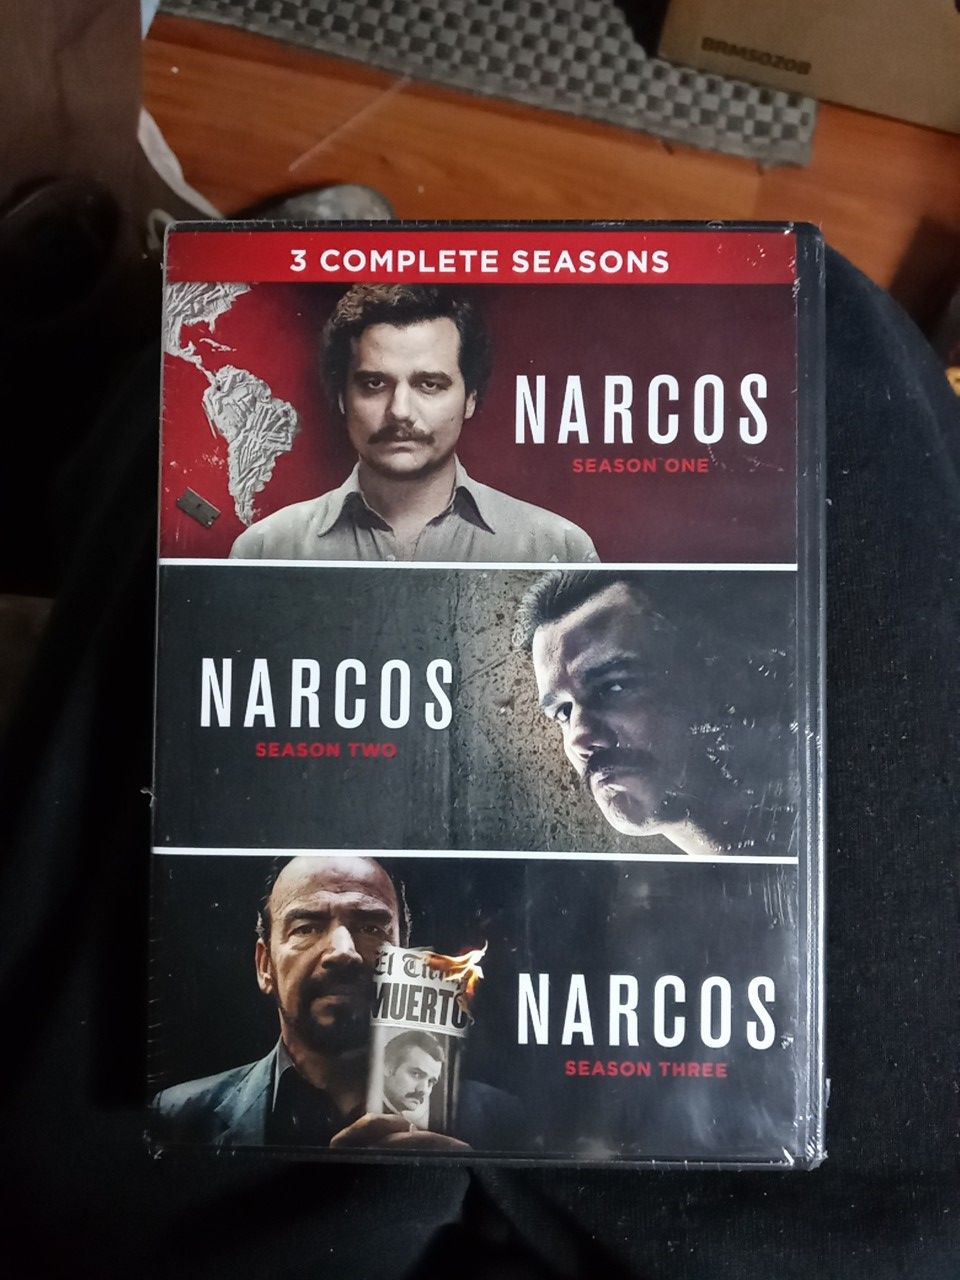 Narcos season one, two, and three